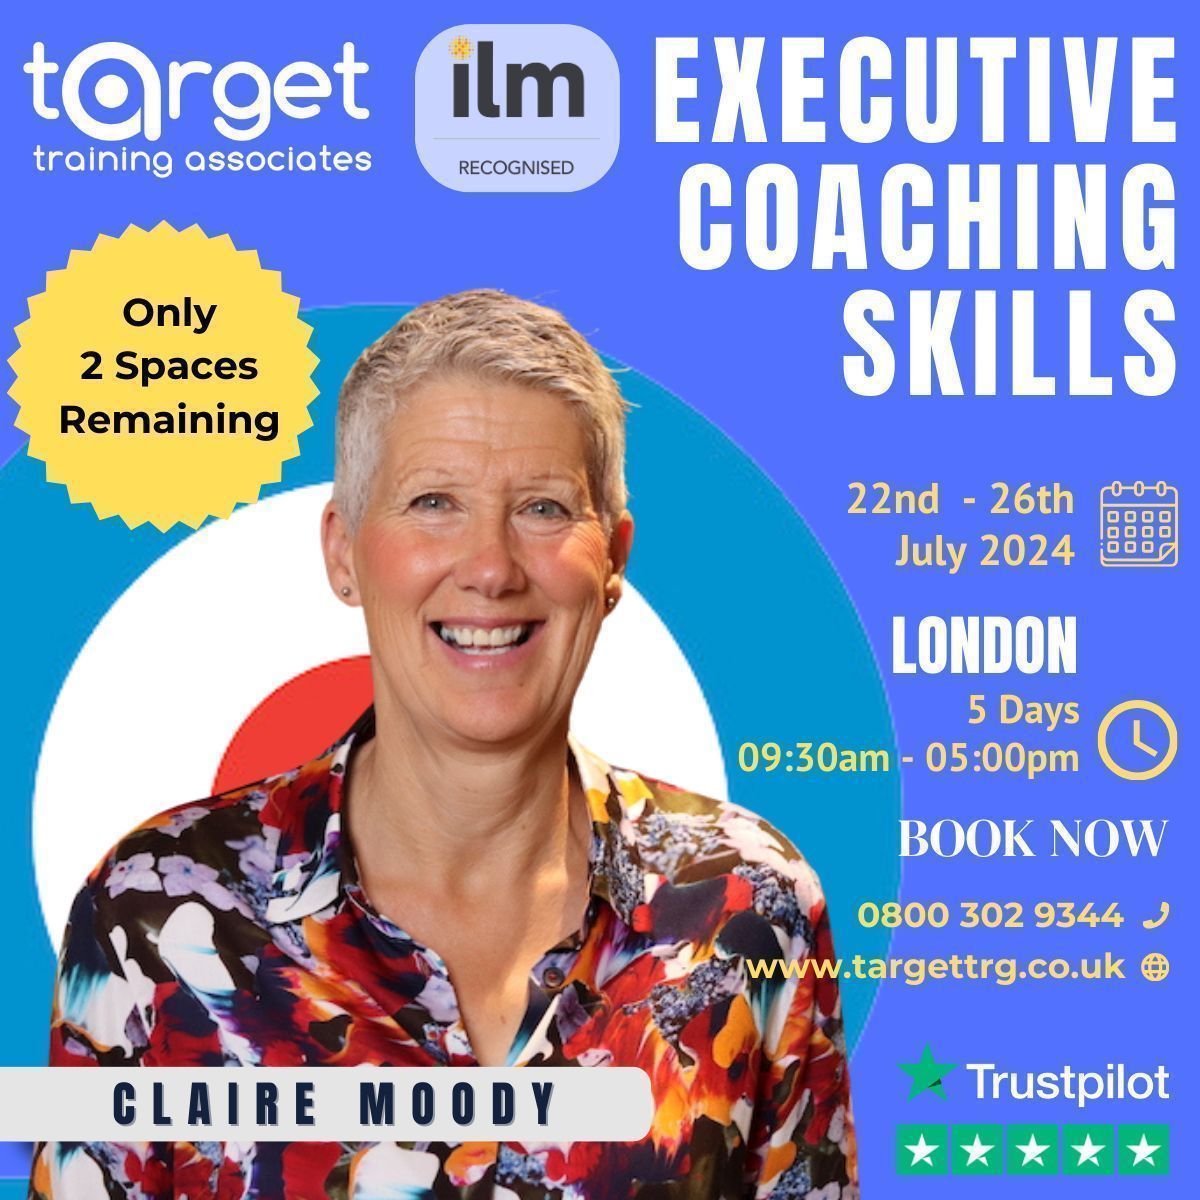 🌟 Elevate Your Leadership Skills this Summer! 🚀 Join our exclusive Executive Coaching Skills course in London and take your career to new heights. Limited spots available. Learn more: buff.ly/4a0e6Jf 
#ExecutiveCoaching #LeadershipDevelopment #LondonCourses 🌟